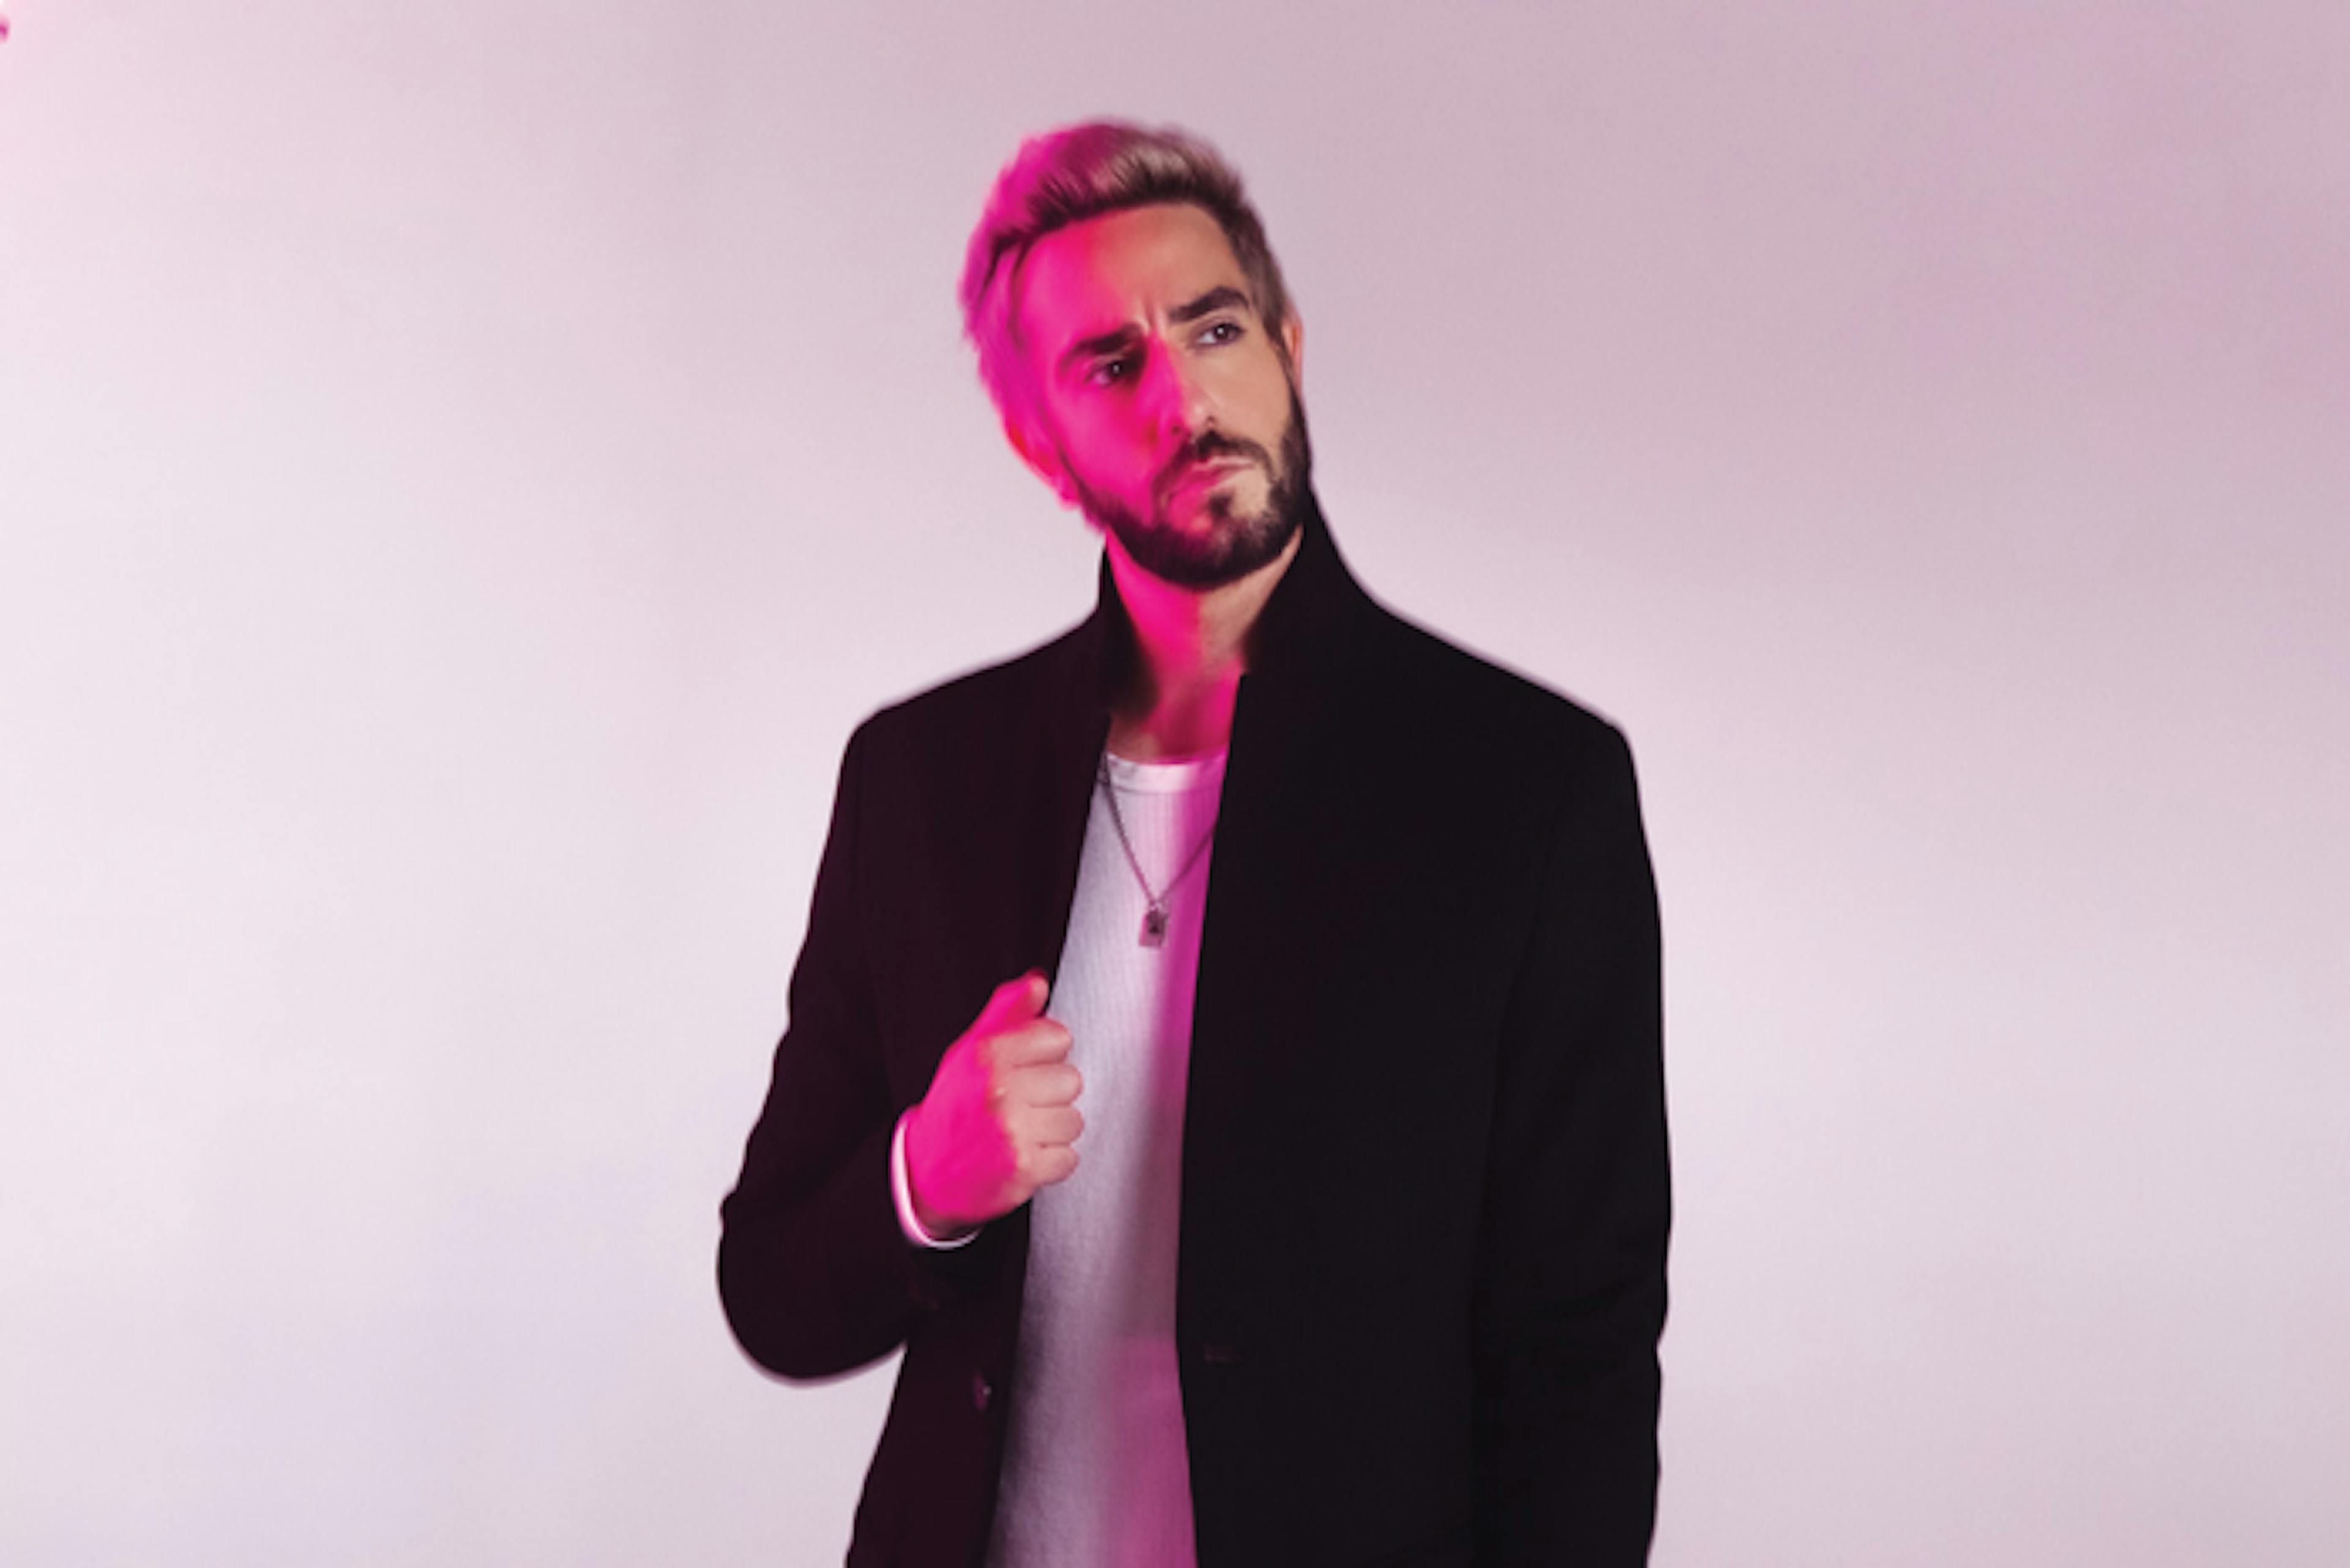 All Time Low's Jack Barakat: The 10 songs that changed my life